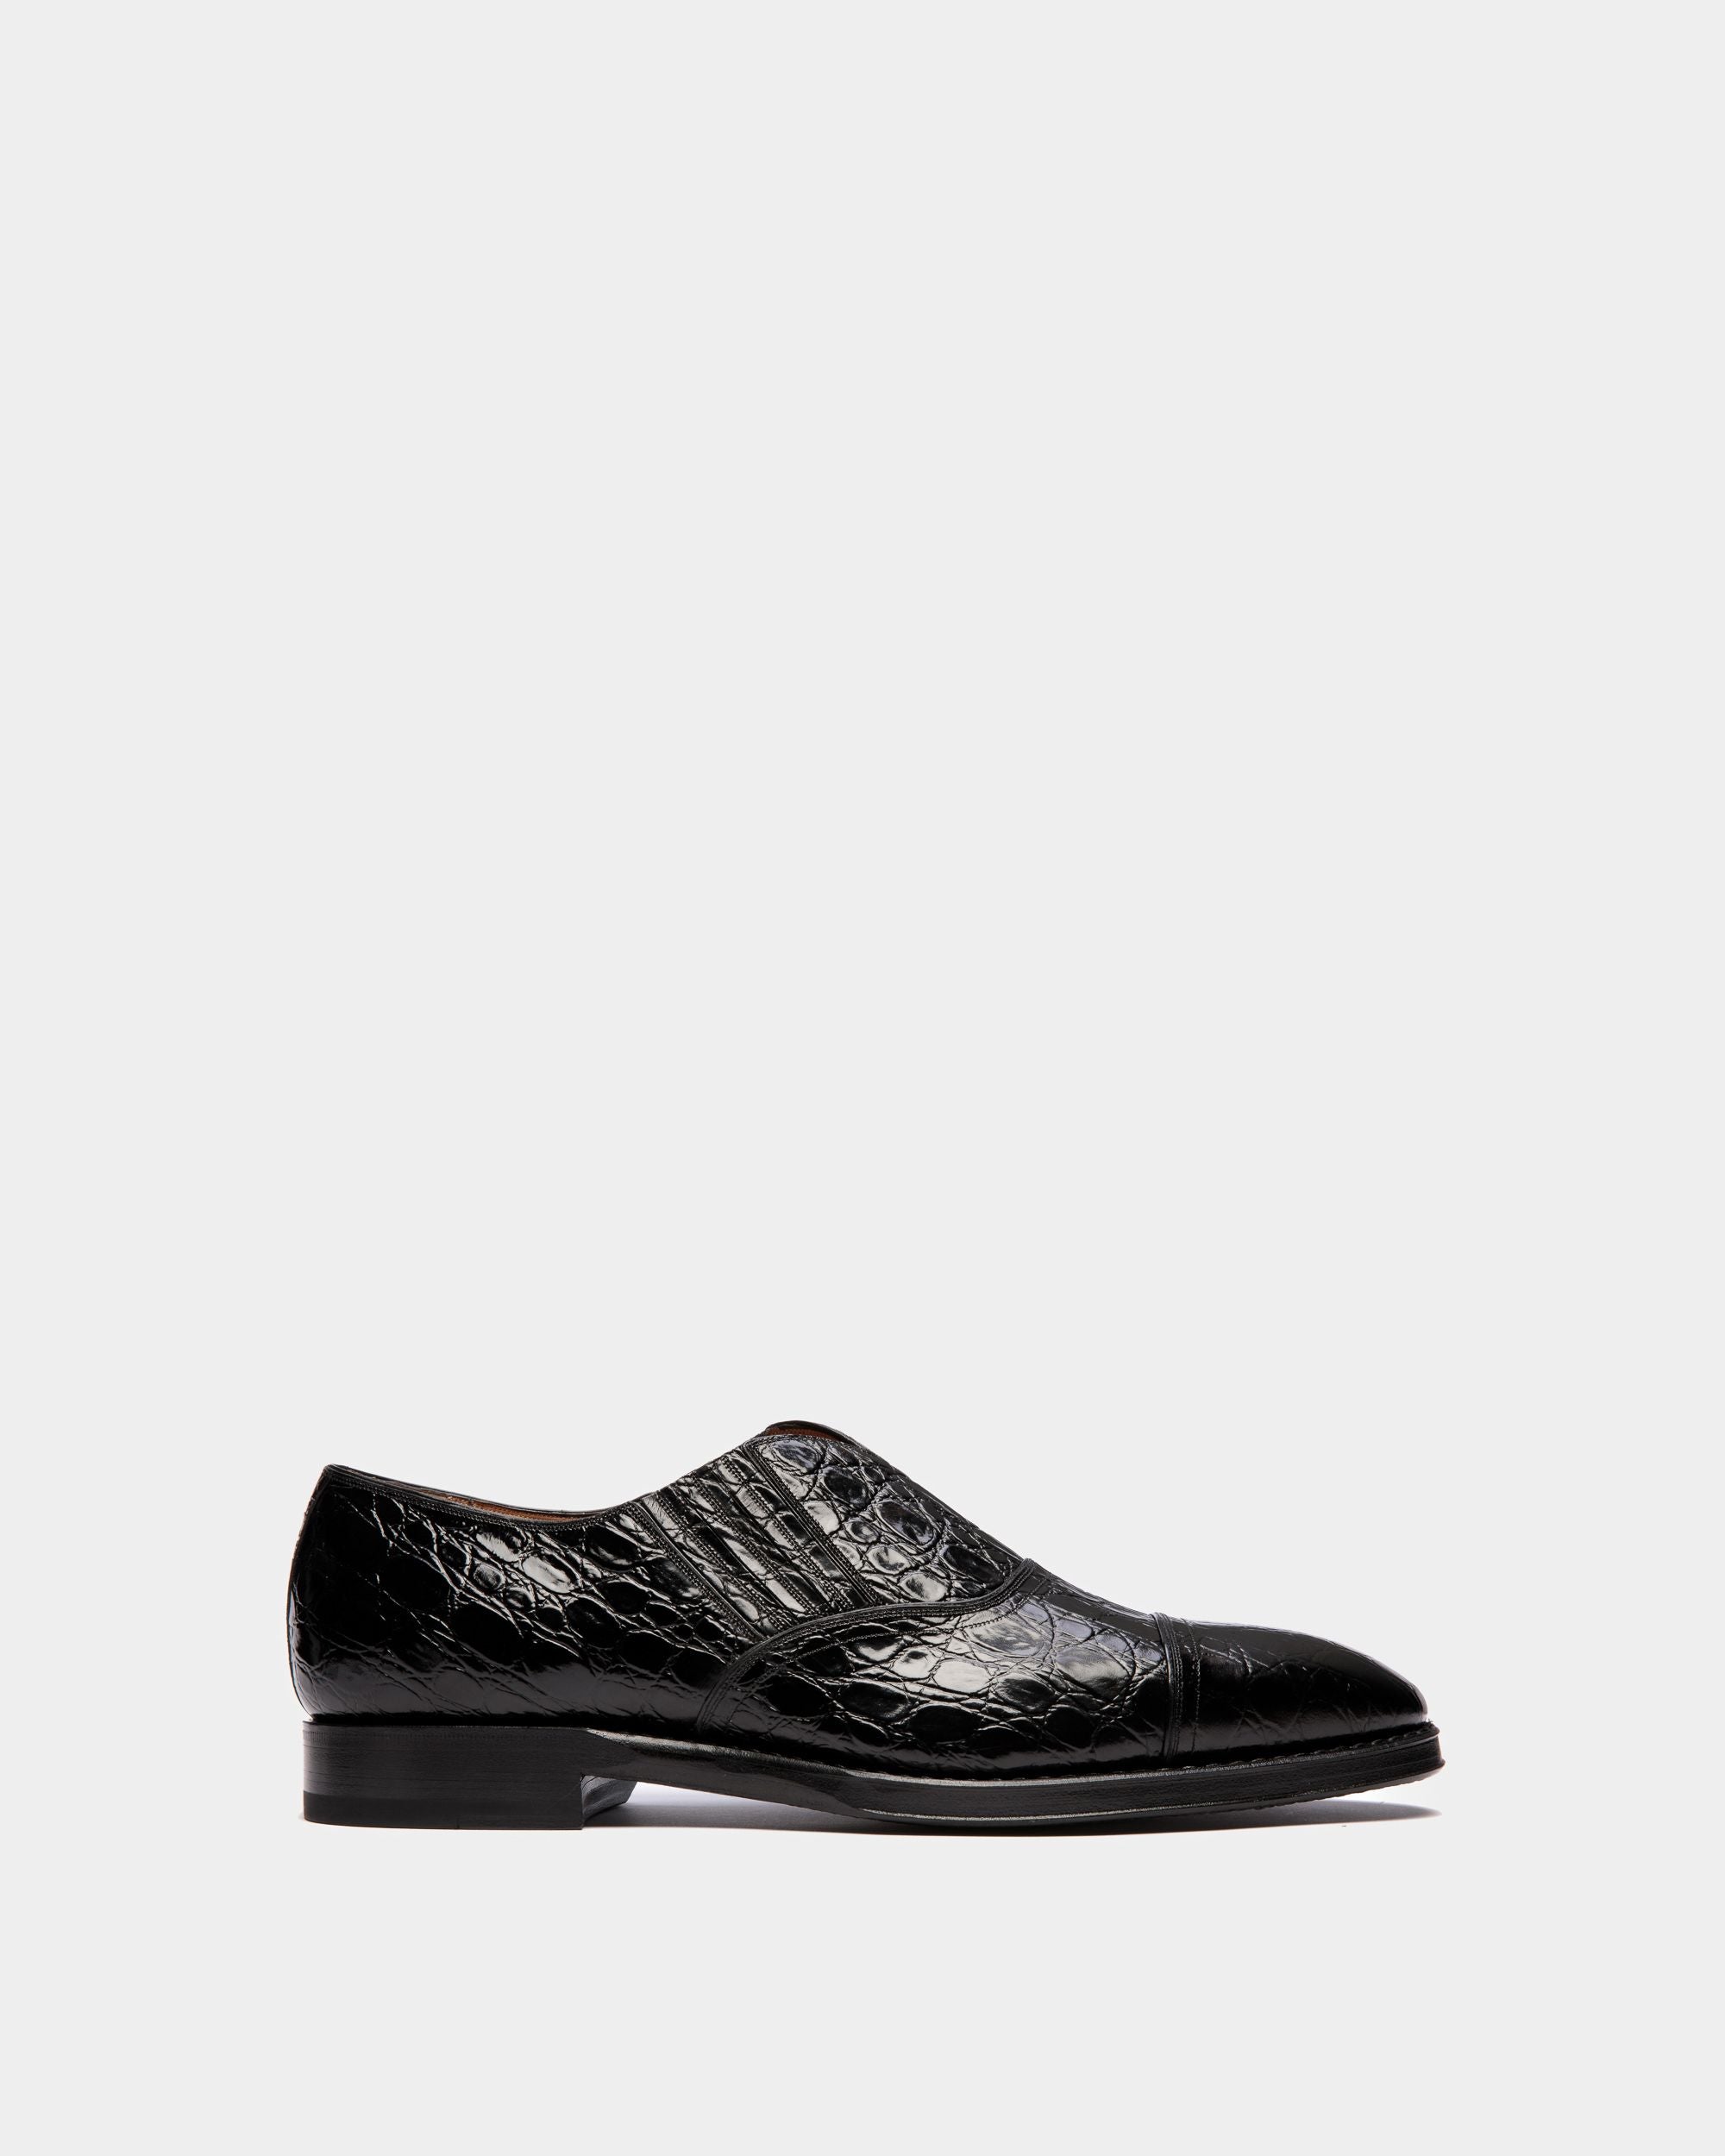 Scribe | Men's Loafer in Black Printed Leather | Bally | Still Life Side